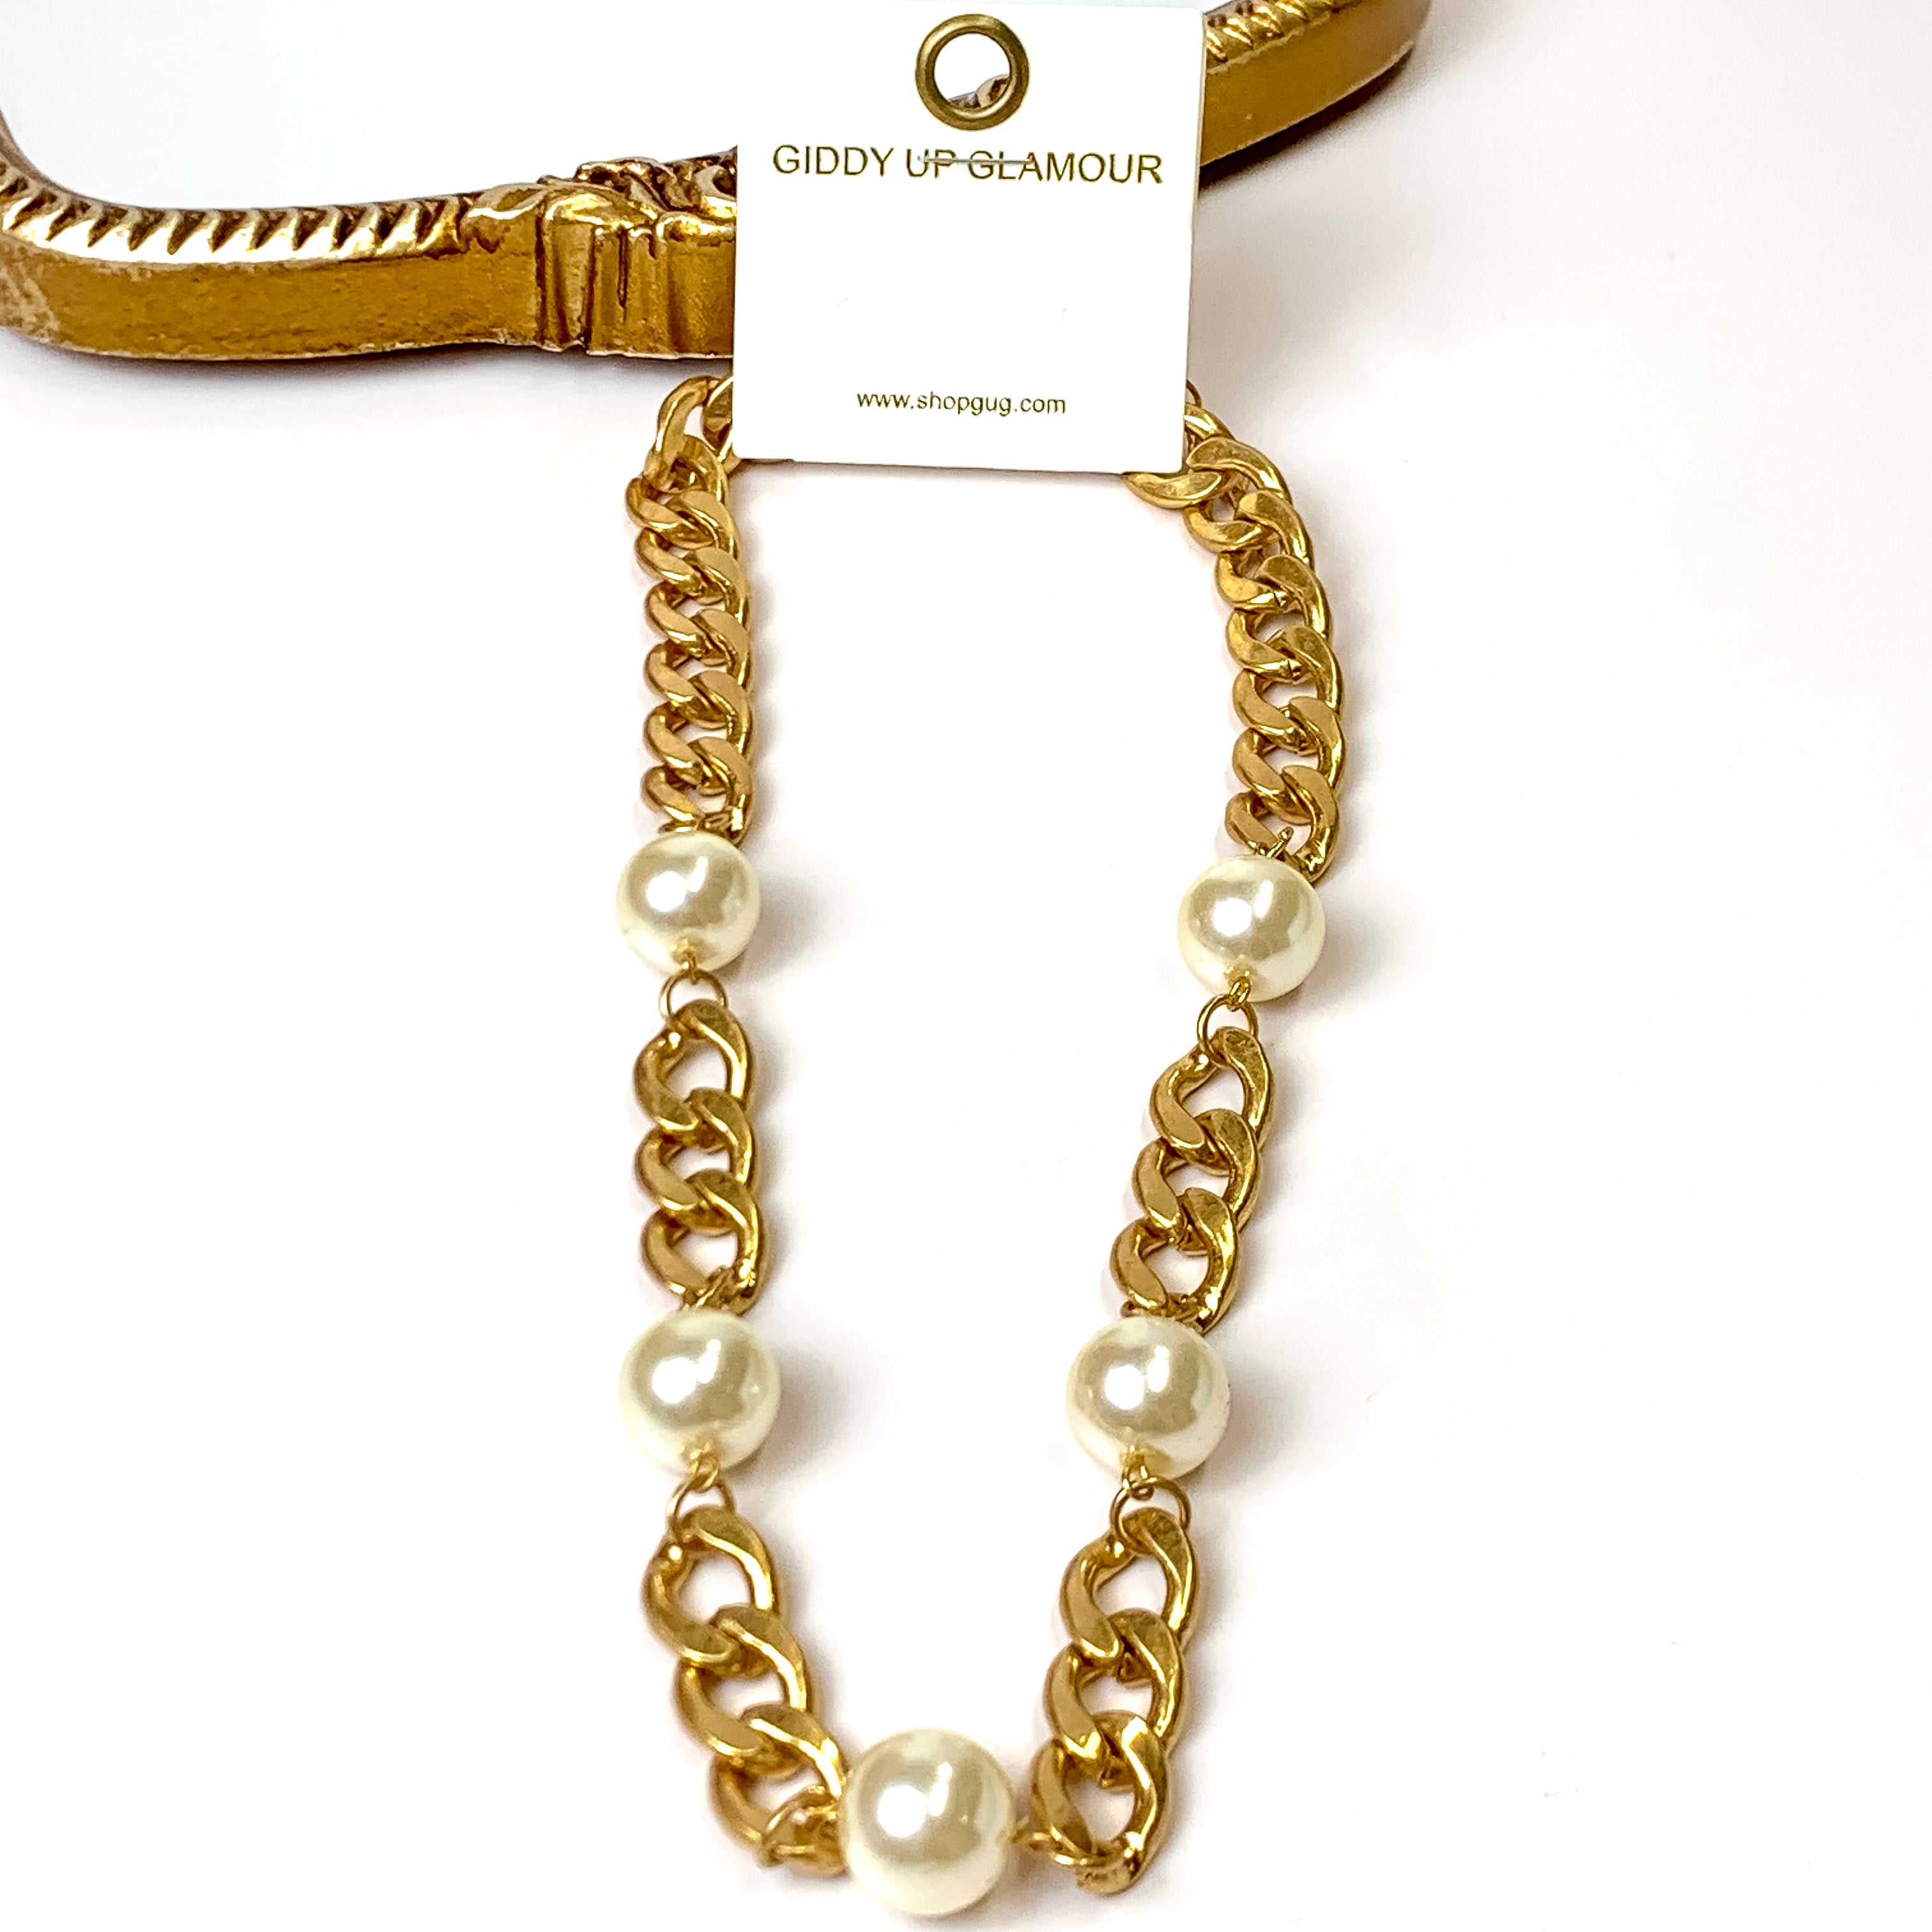 Gold Tone Chain Necklace with Pearl Bead Accents - Giddy Up Glamour Boutique